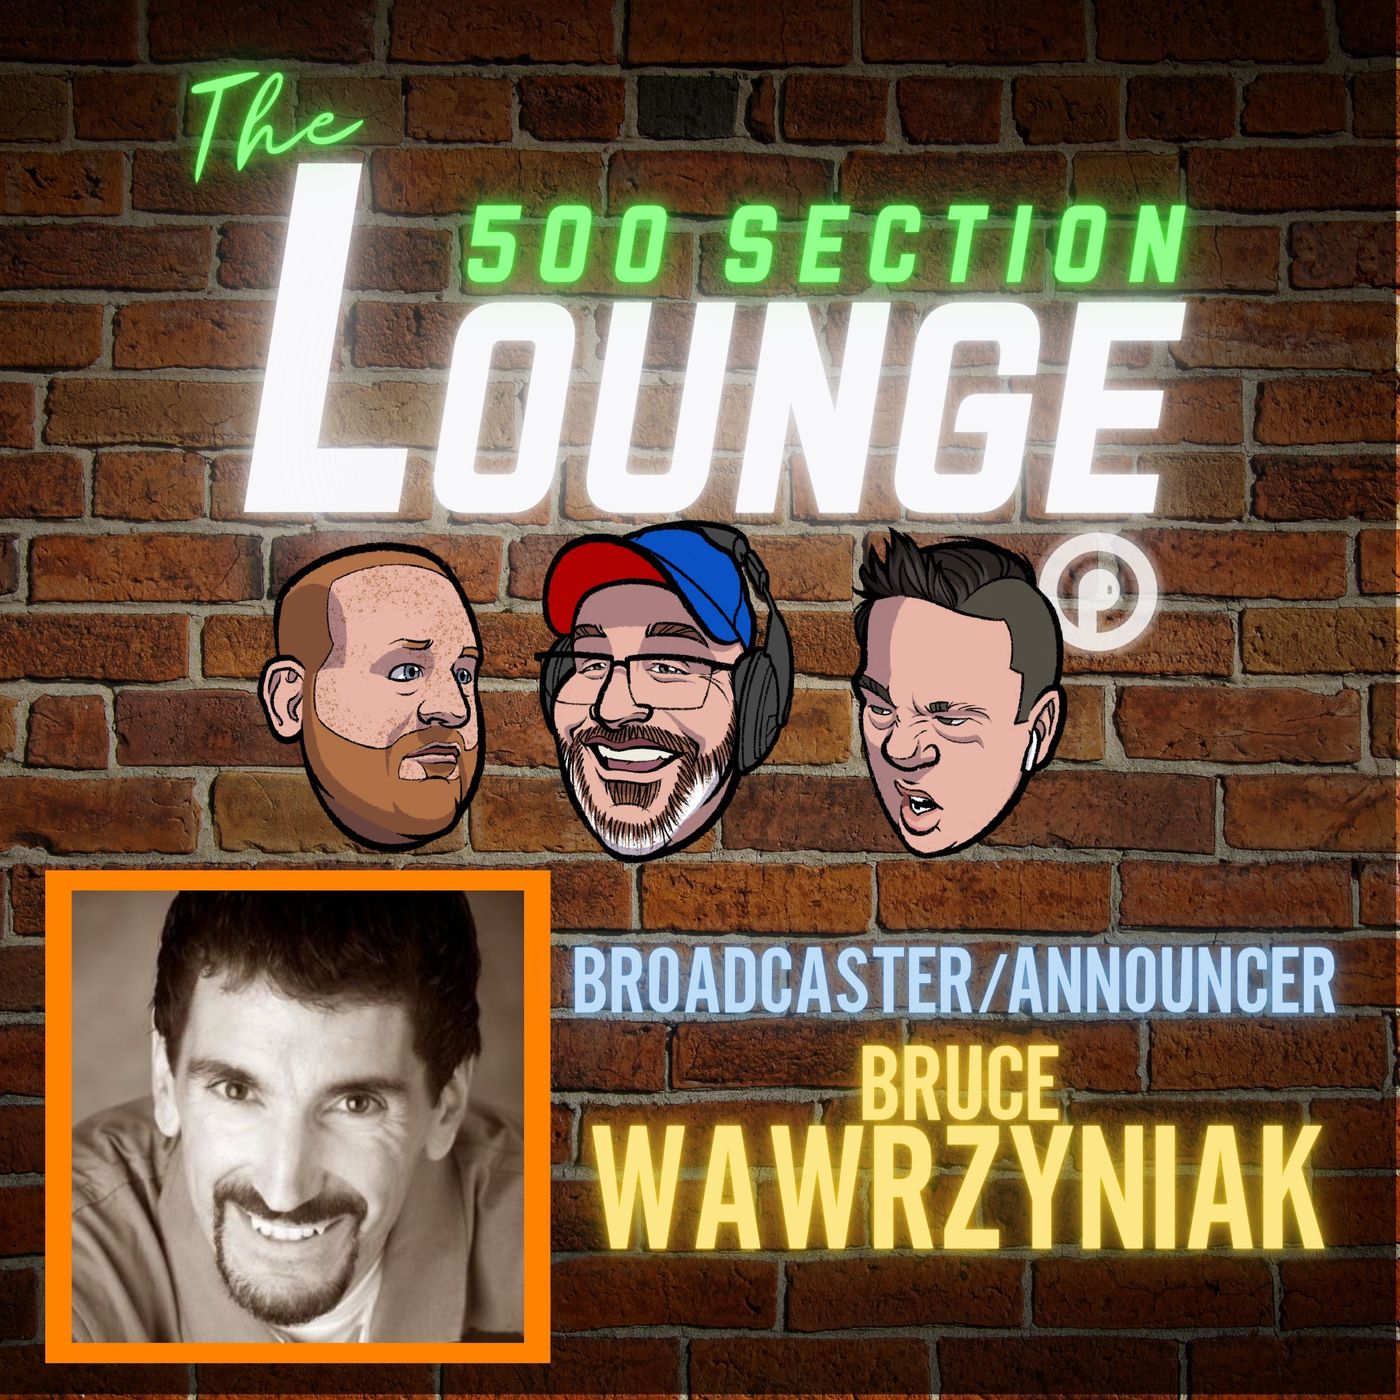 E136: Bruce Wawrzyniak Broadcasts His Story In the Lounge! Image